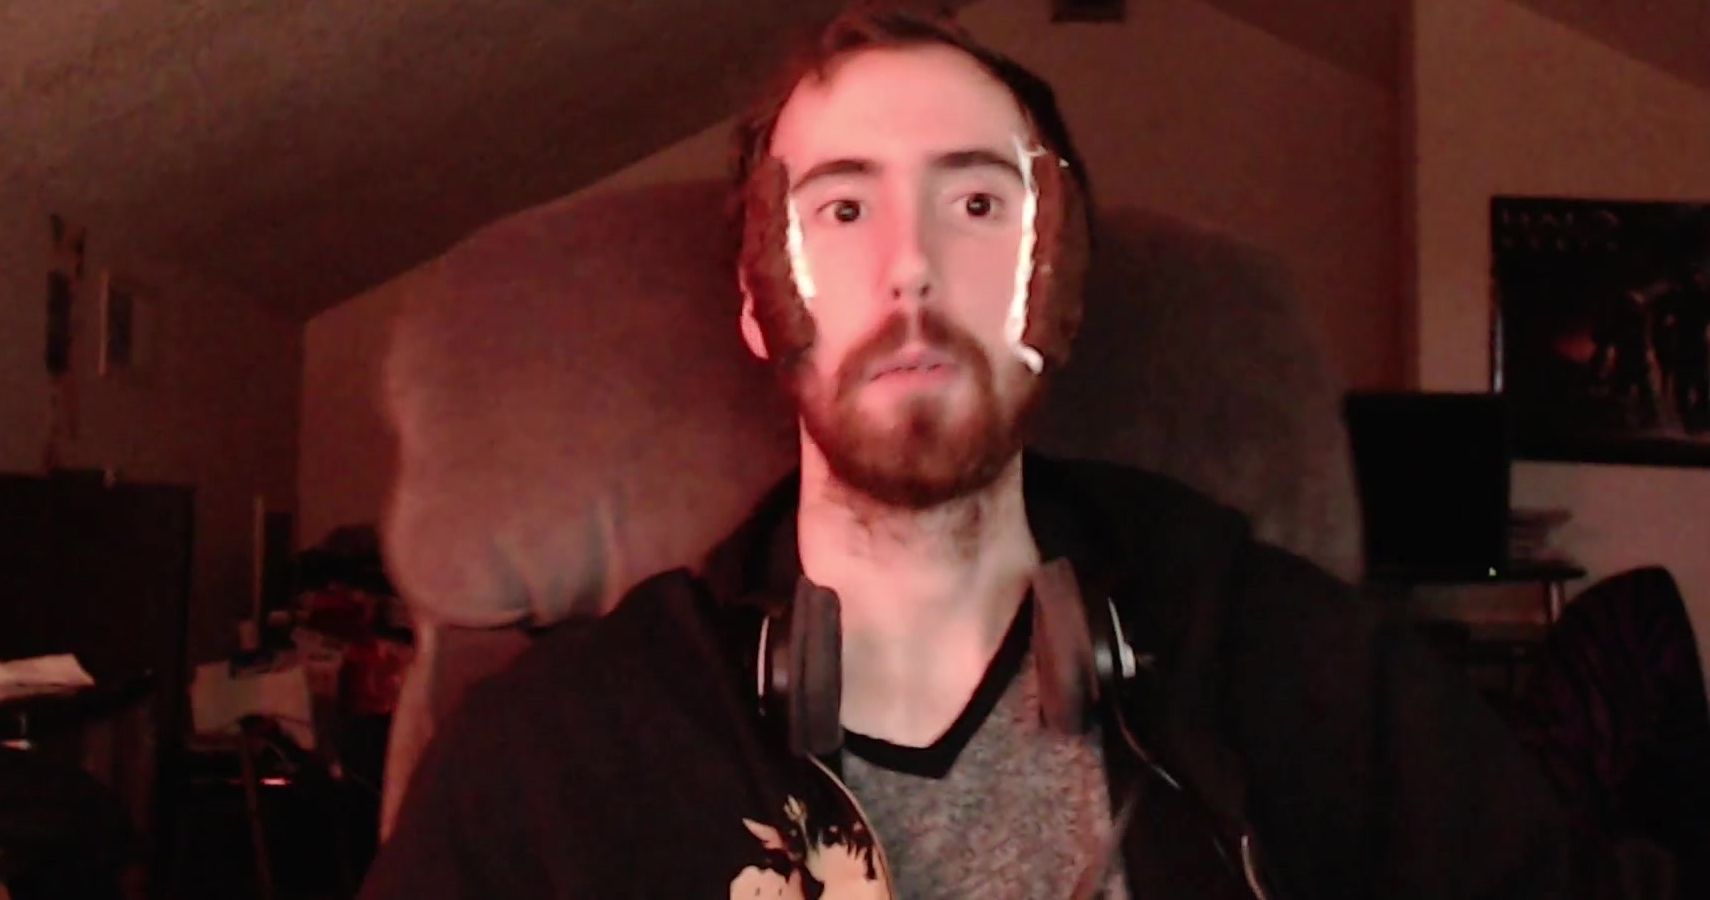 Asmongold Is About To Hit Max Level In WoW Classic In Less Than 2 Weeks